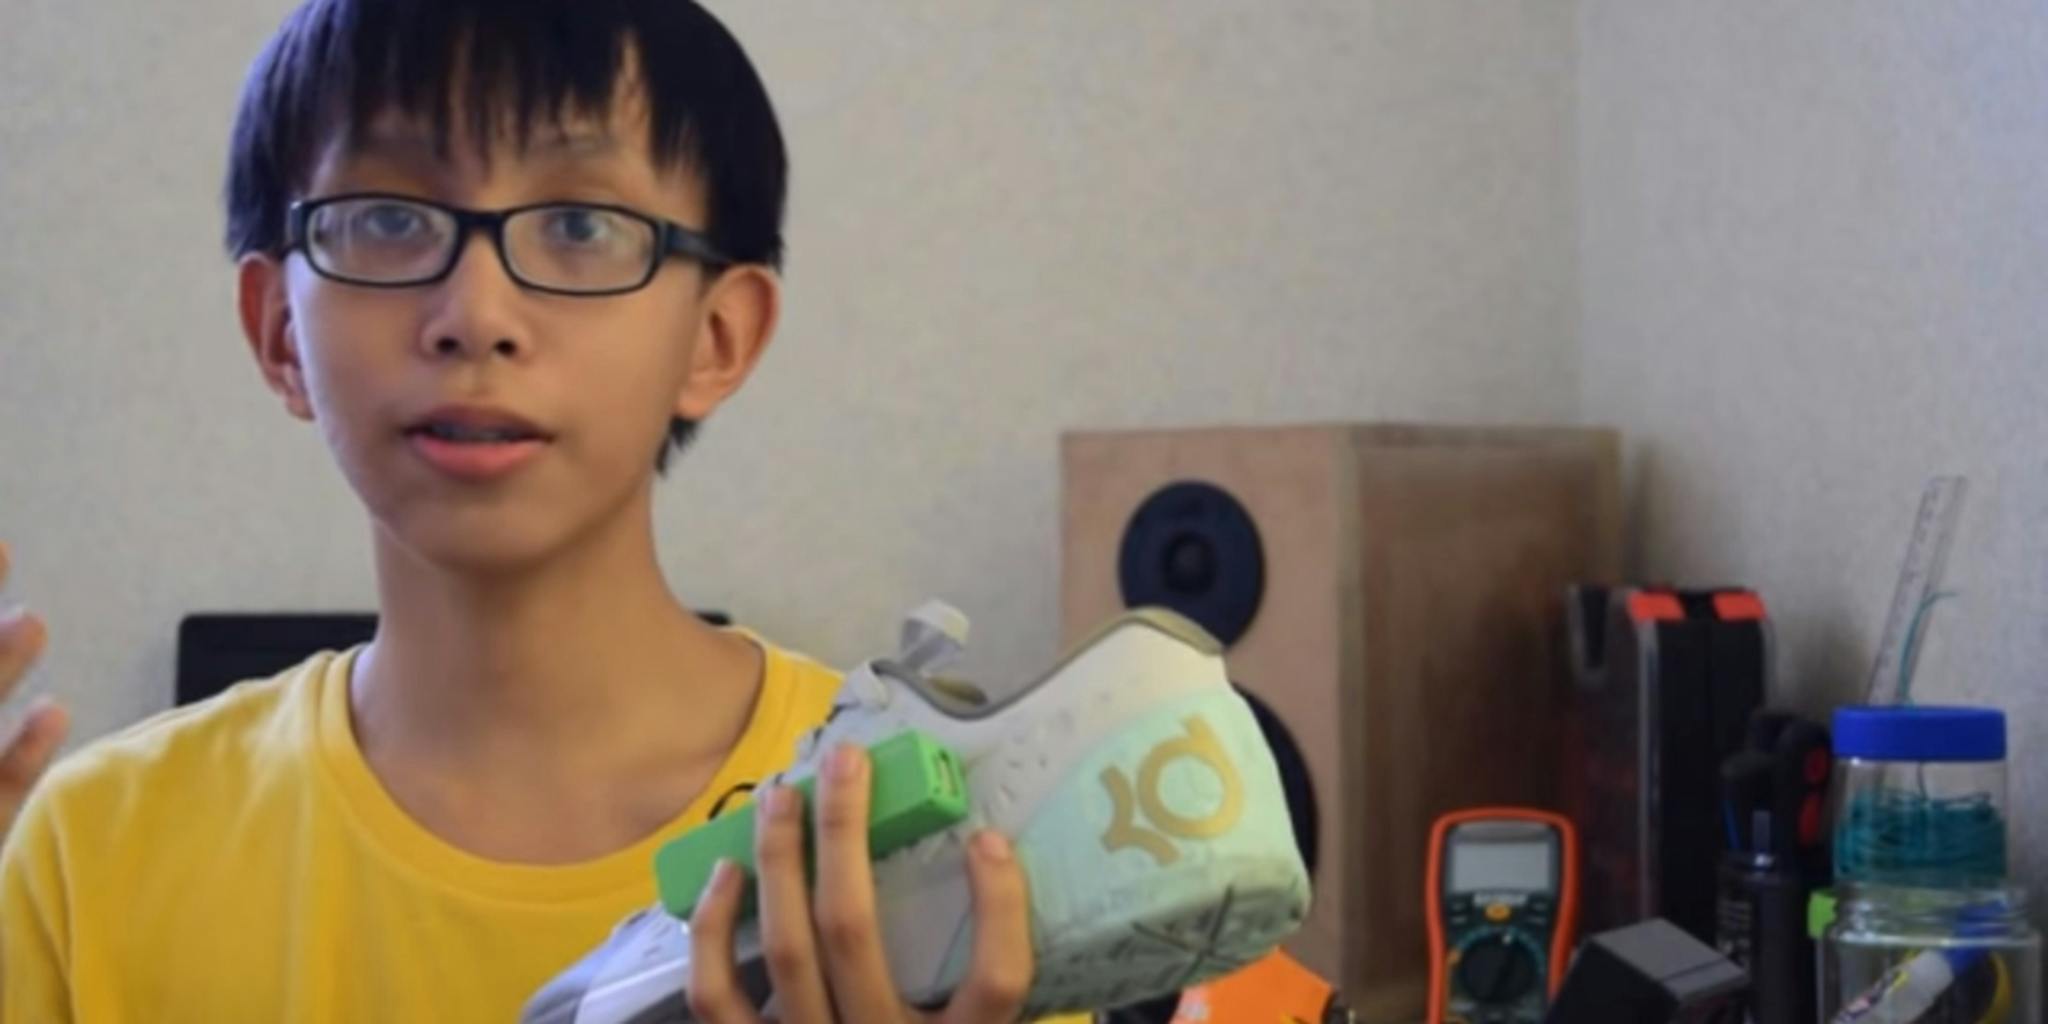 15-year-old invents shoes that charge your phone as you walk - The Daily Dot